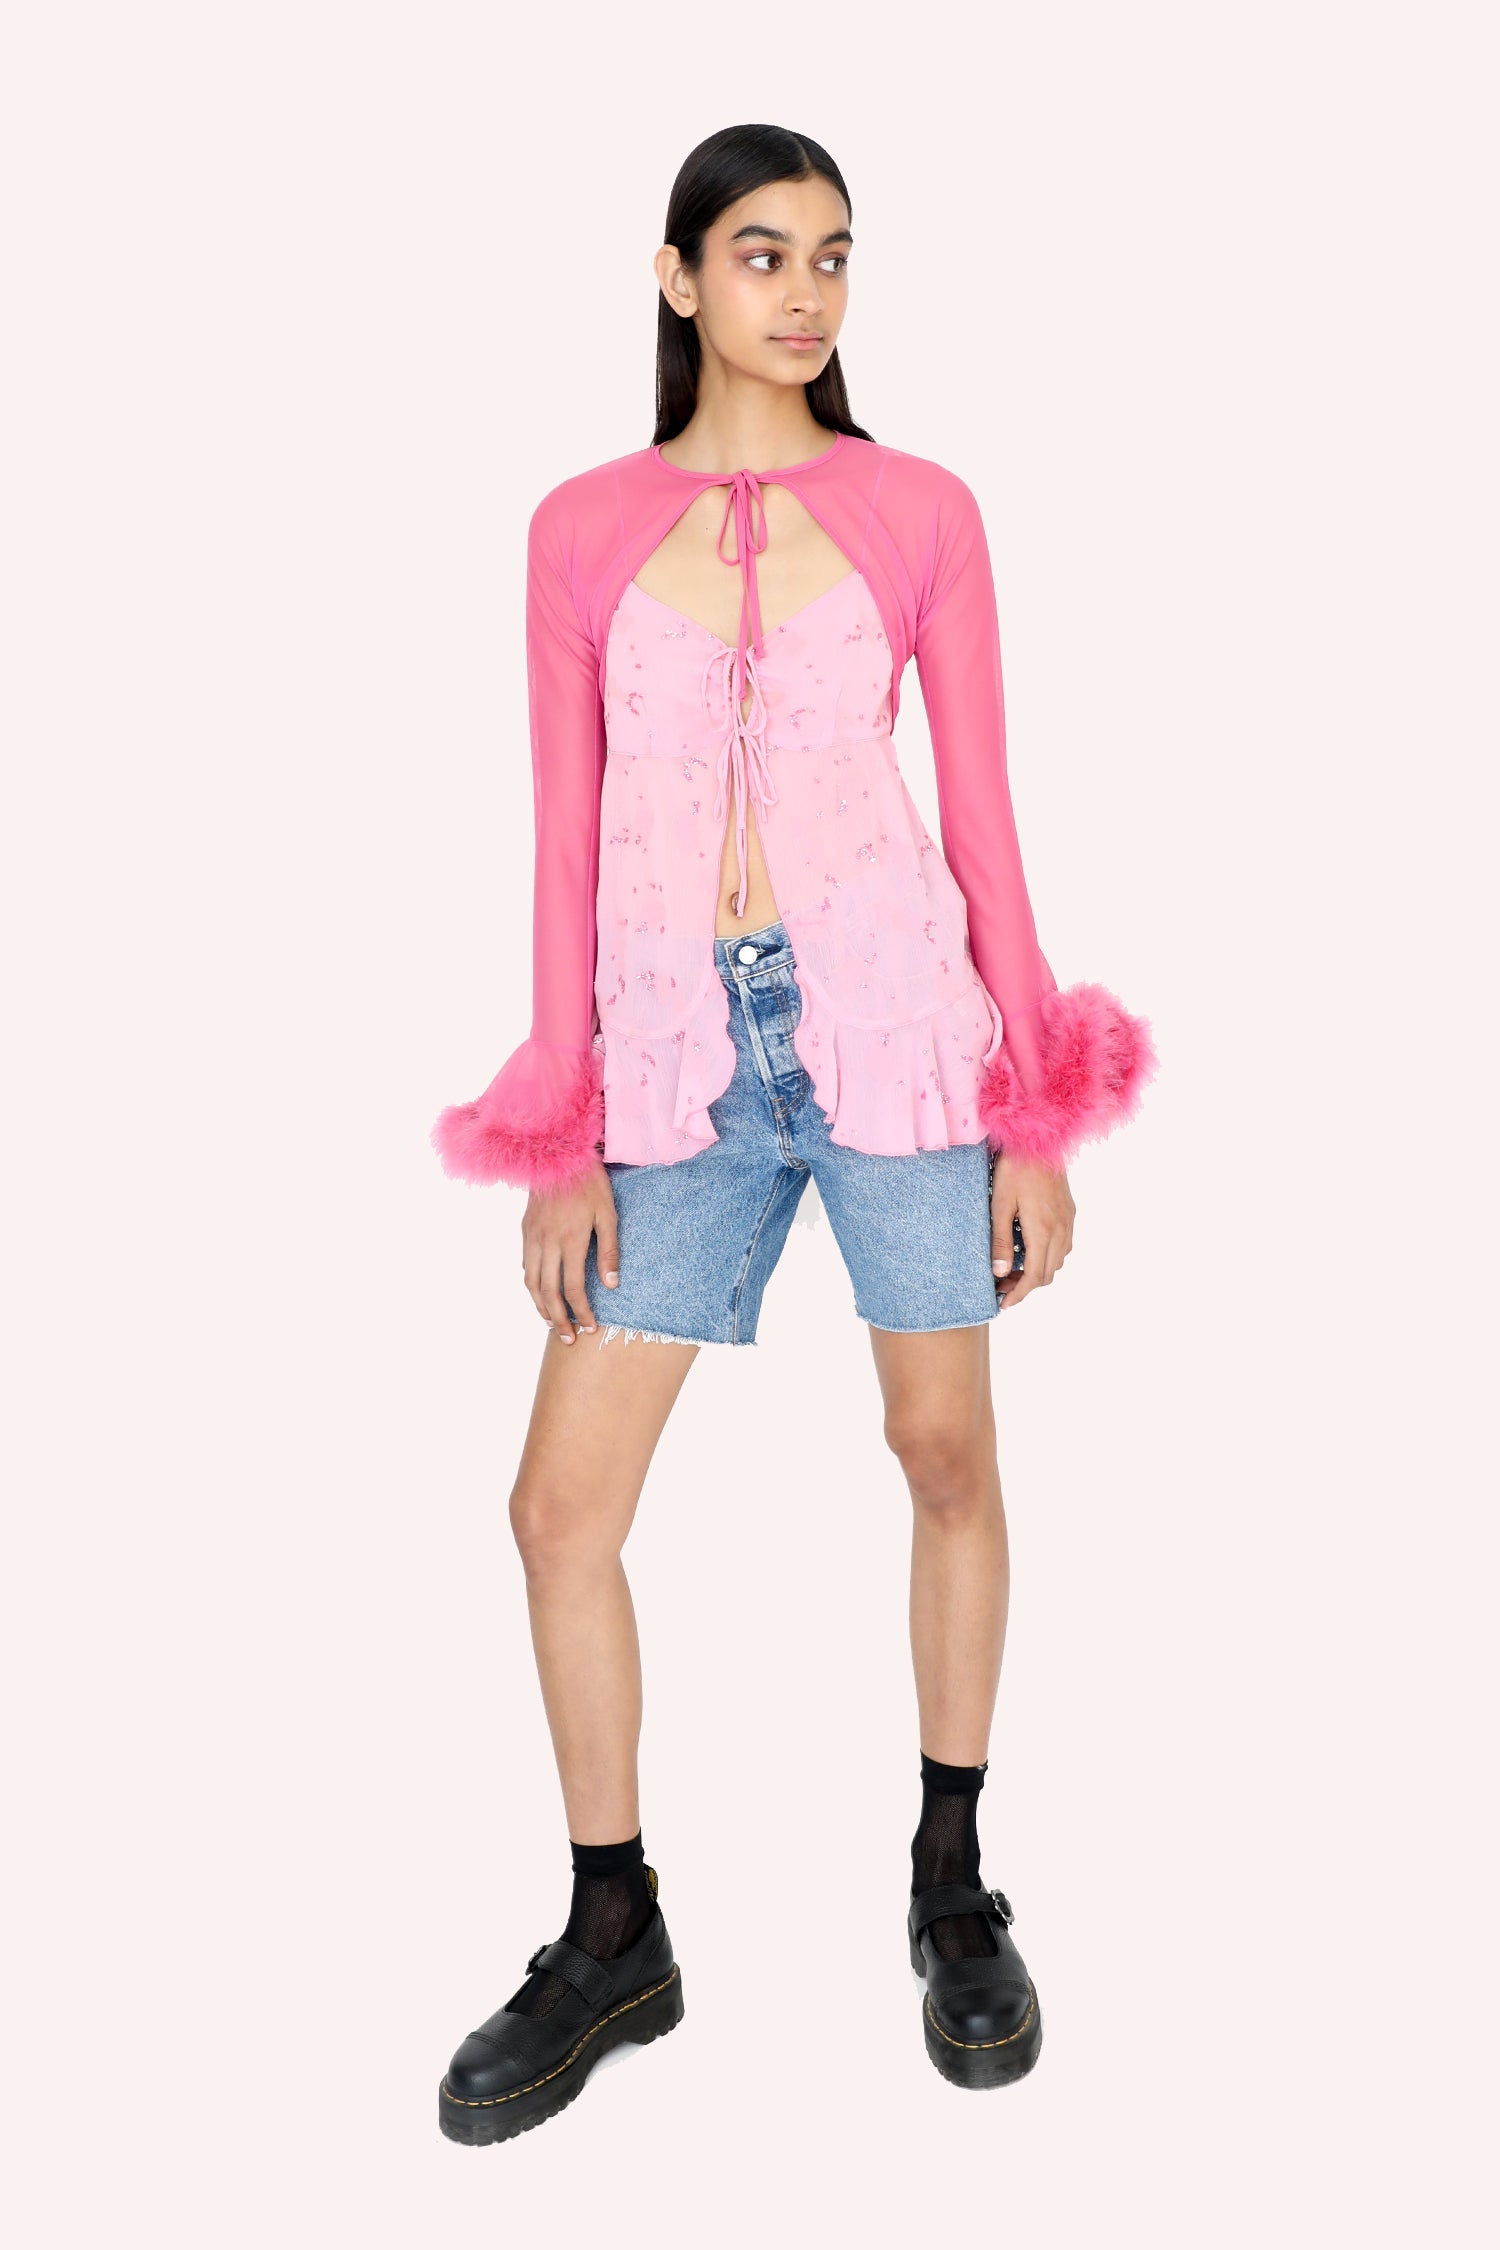 Mesh Bolero Pink, long sleeves, fluffy fur at wrist, a pink lace at neckline to ties up, open in front